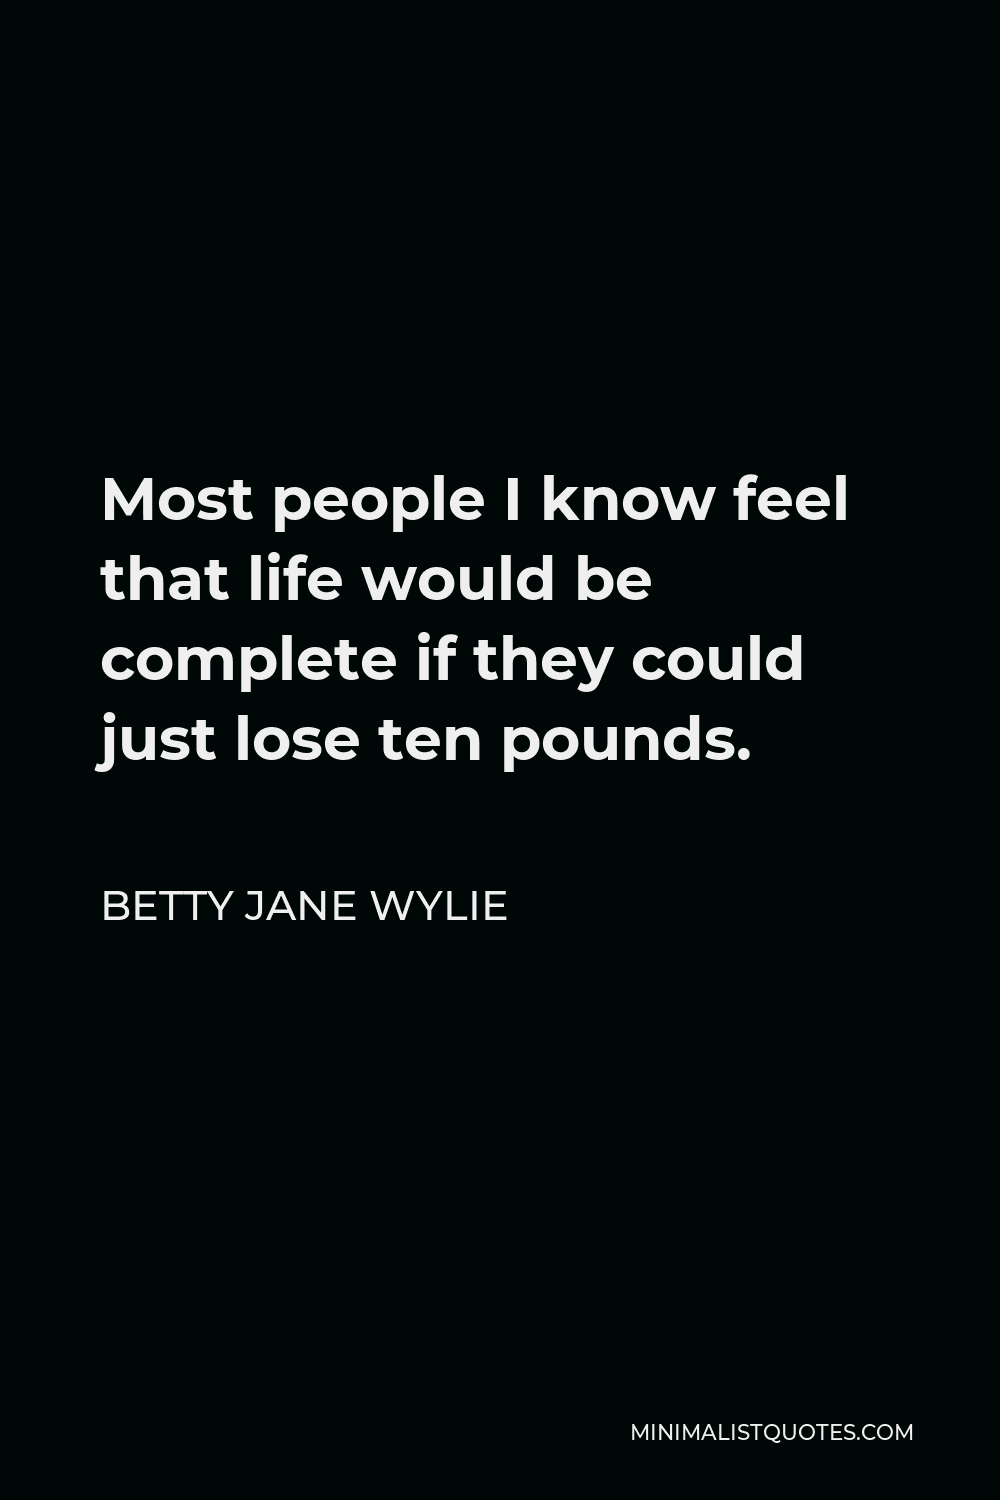 Betty Jane Wylie Quote - Most people I know feel that life would be complete if they could just lose ten pounds.